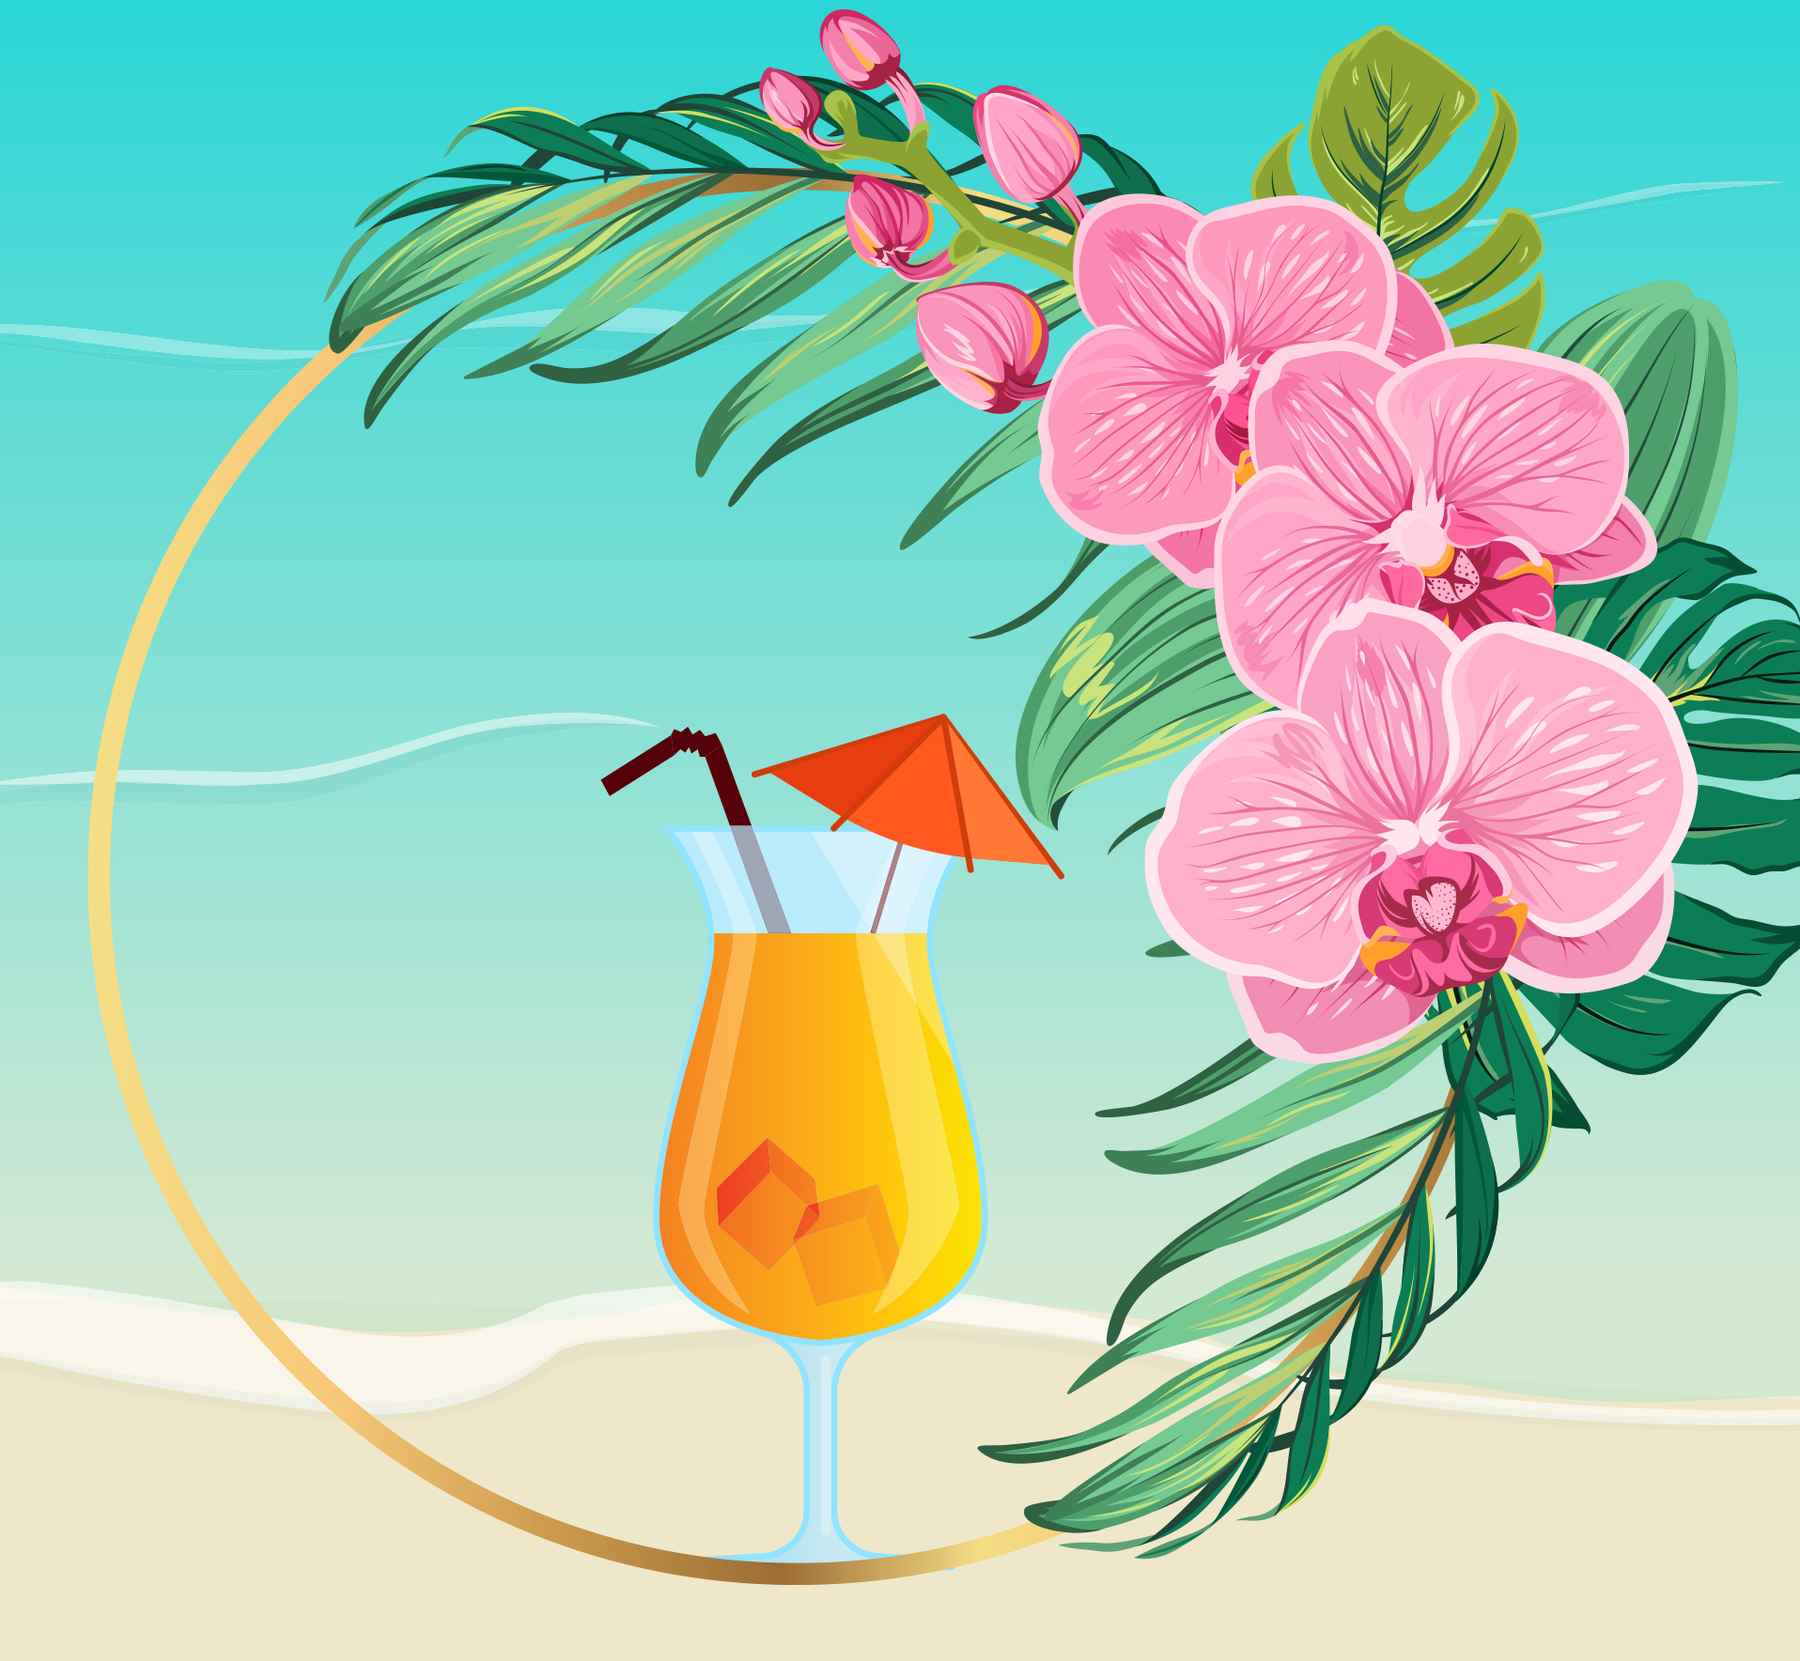 Illustration of sandy beach with clear blue-green ocean, pink hibiscus flowers, and cocktail in hurricane glass garnished with tiny umbrella. Rhum agricole recipe.